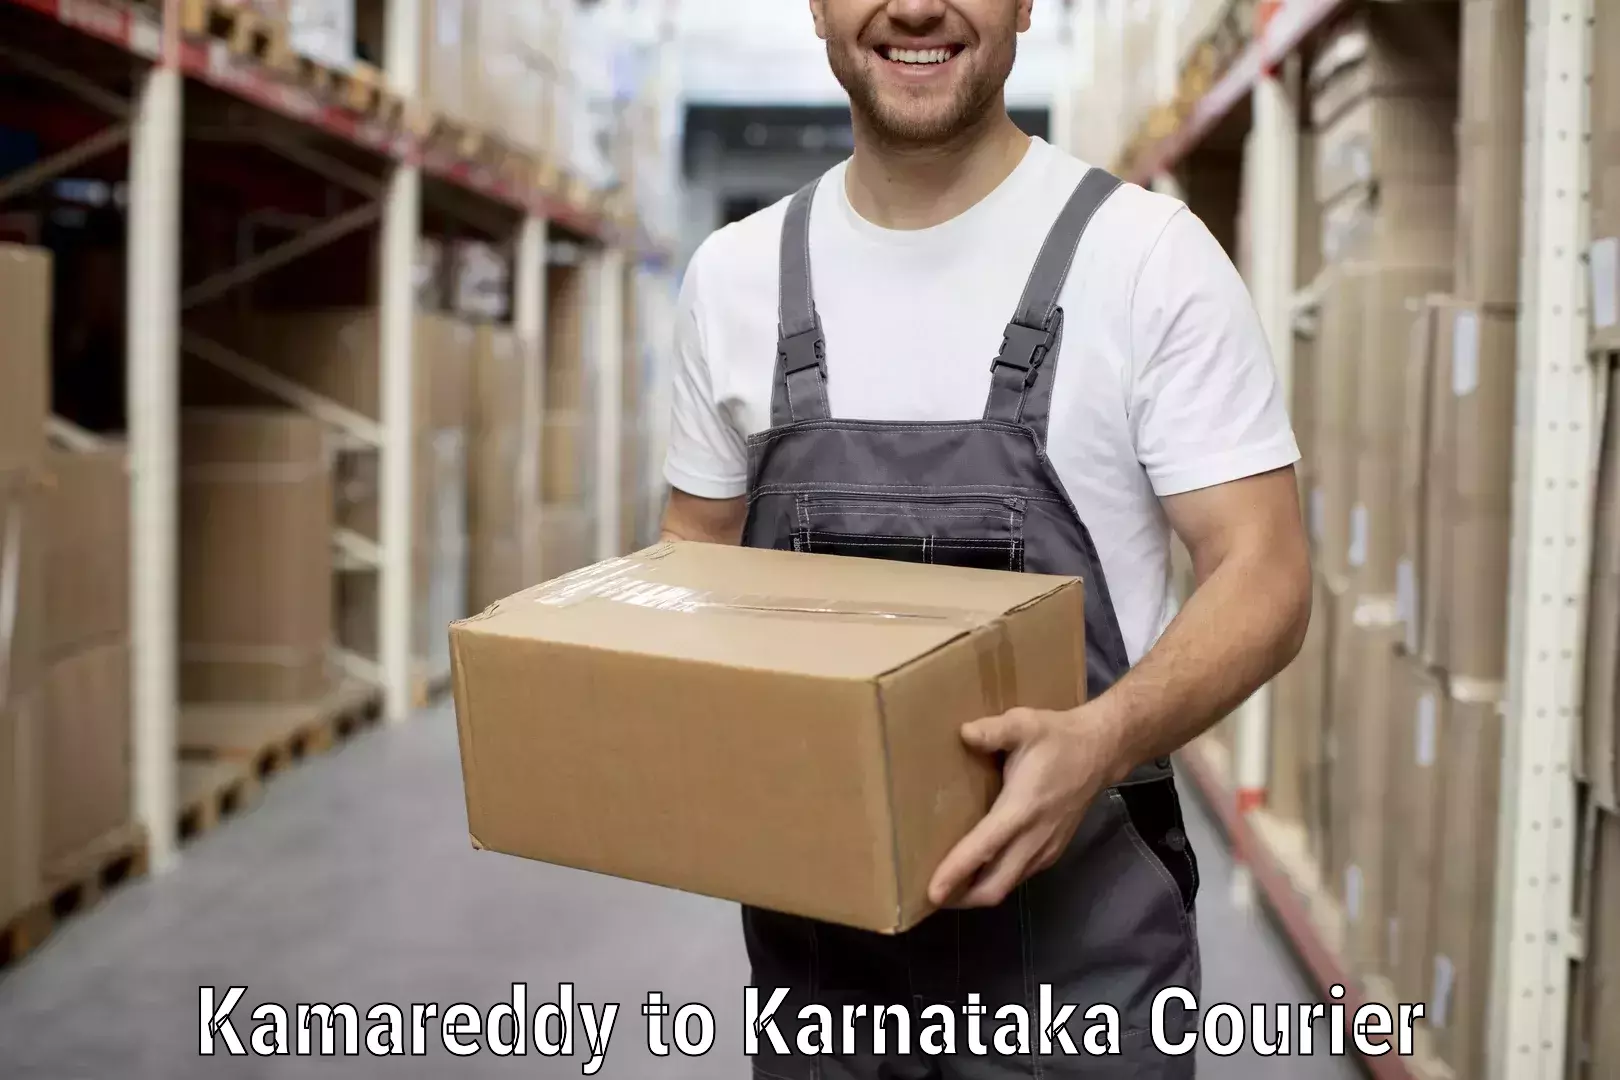 Household moving experts Kamareddy to Yellare